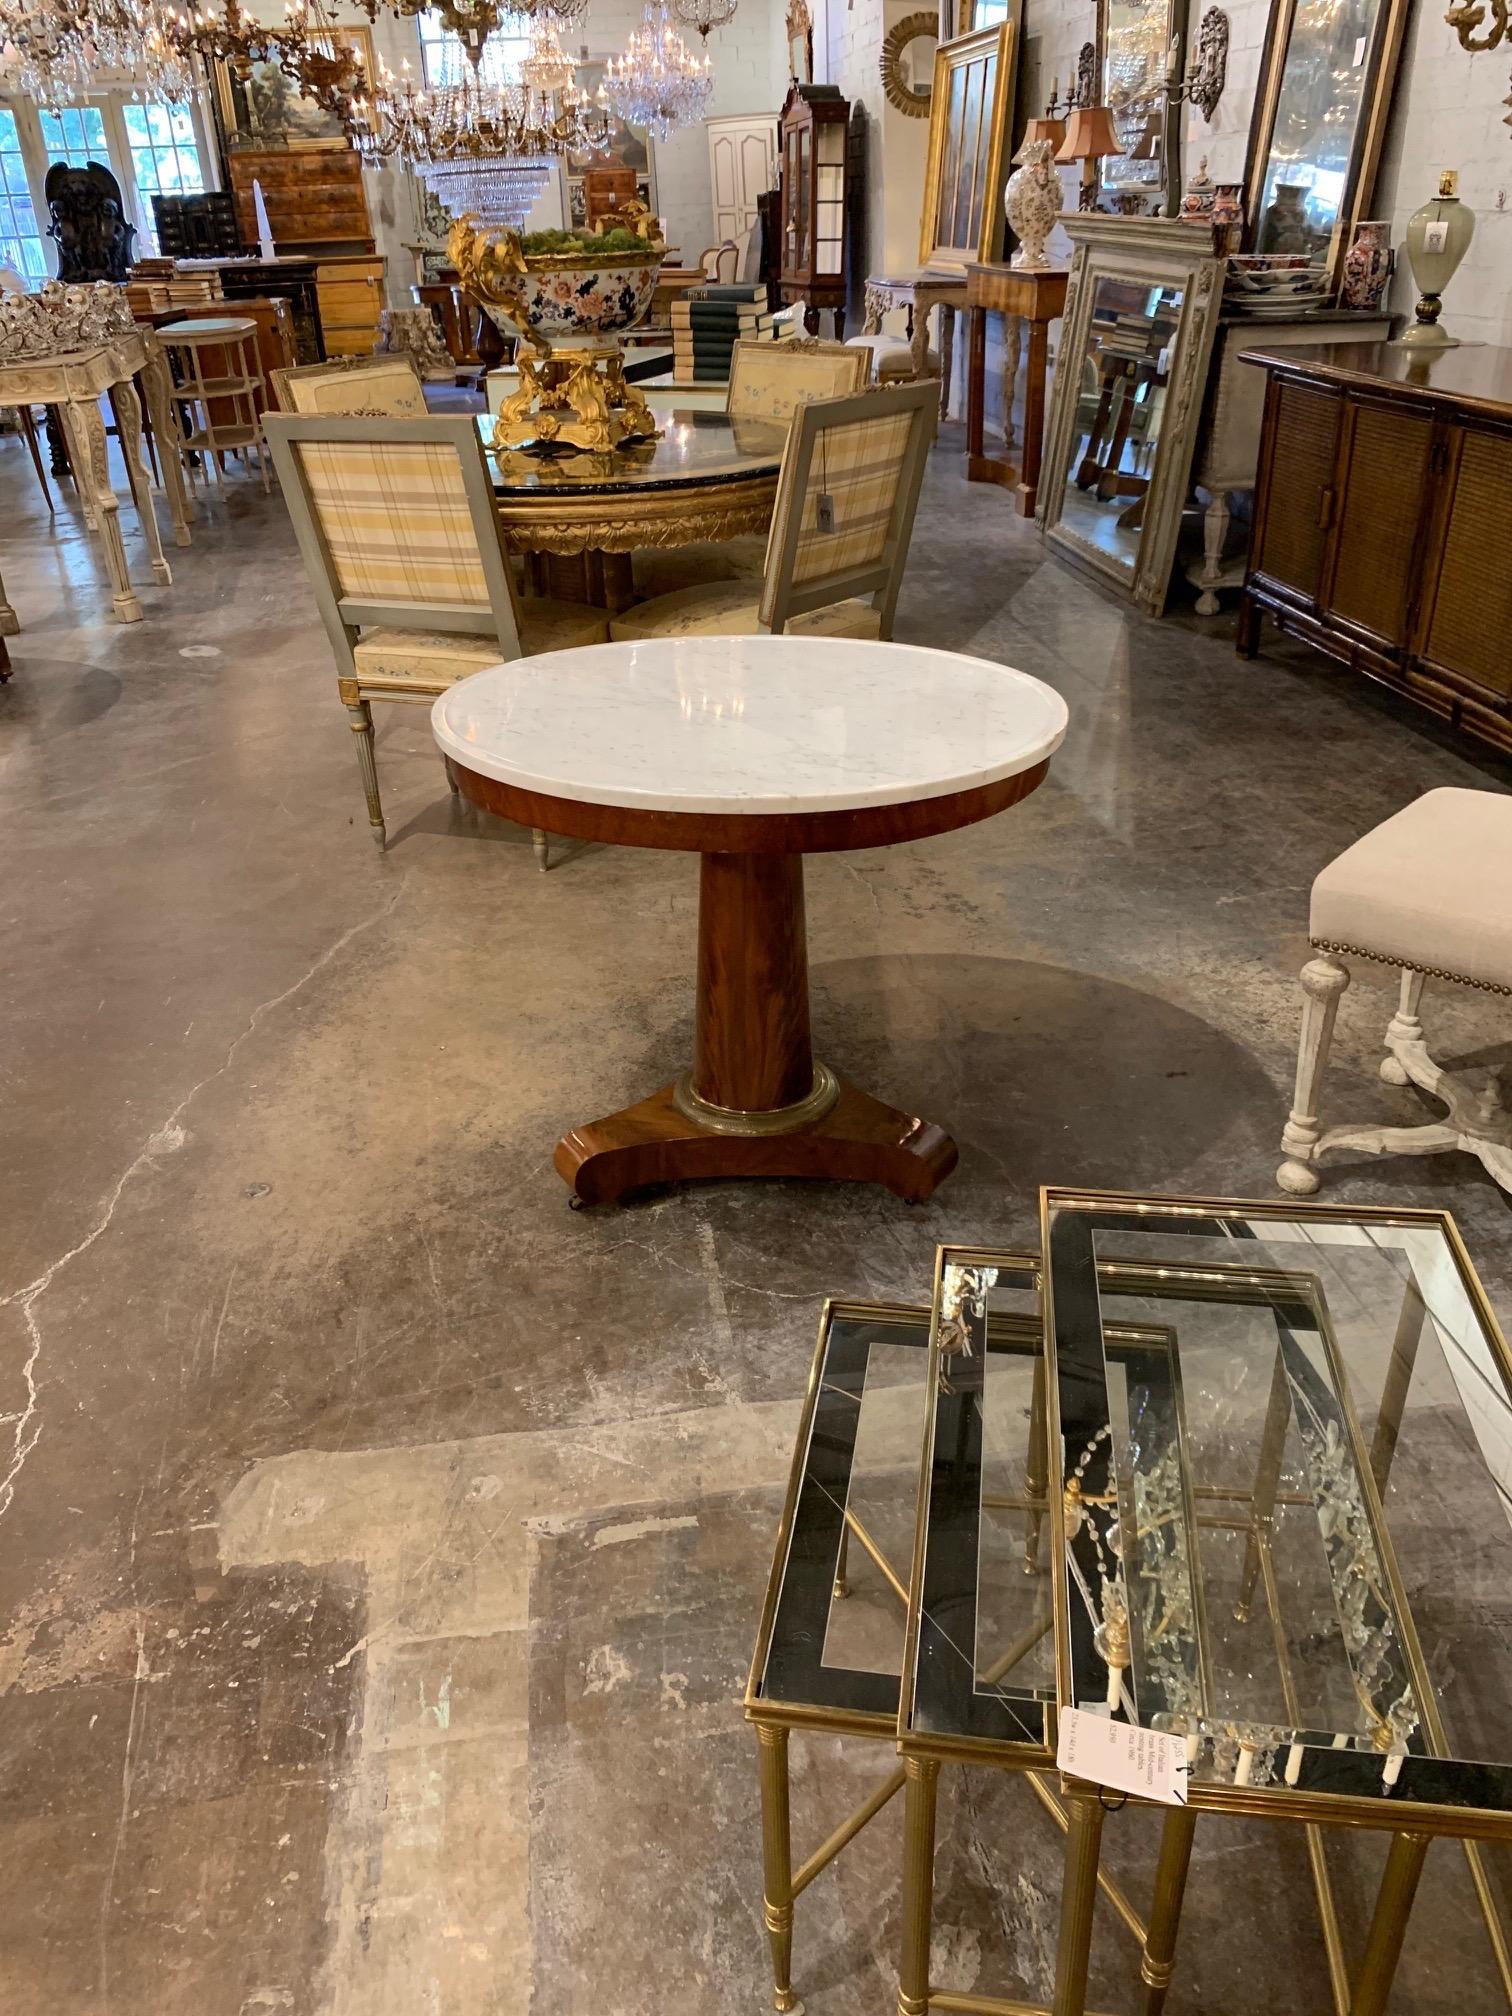 Lovely 19th century French Empire mahogany side table with original marble top. The wood base has a beautiful polished look and the marble is gorgeous. Very fine quality!!